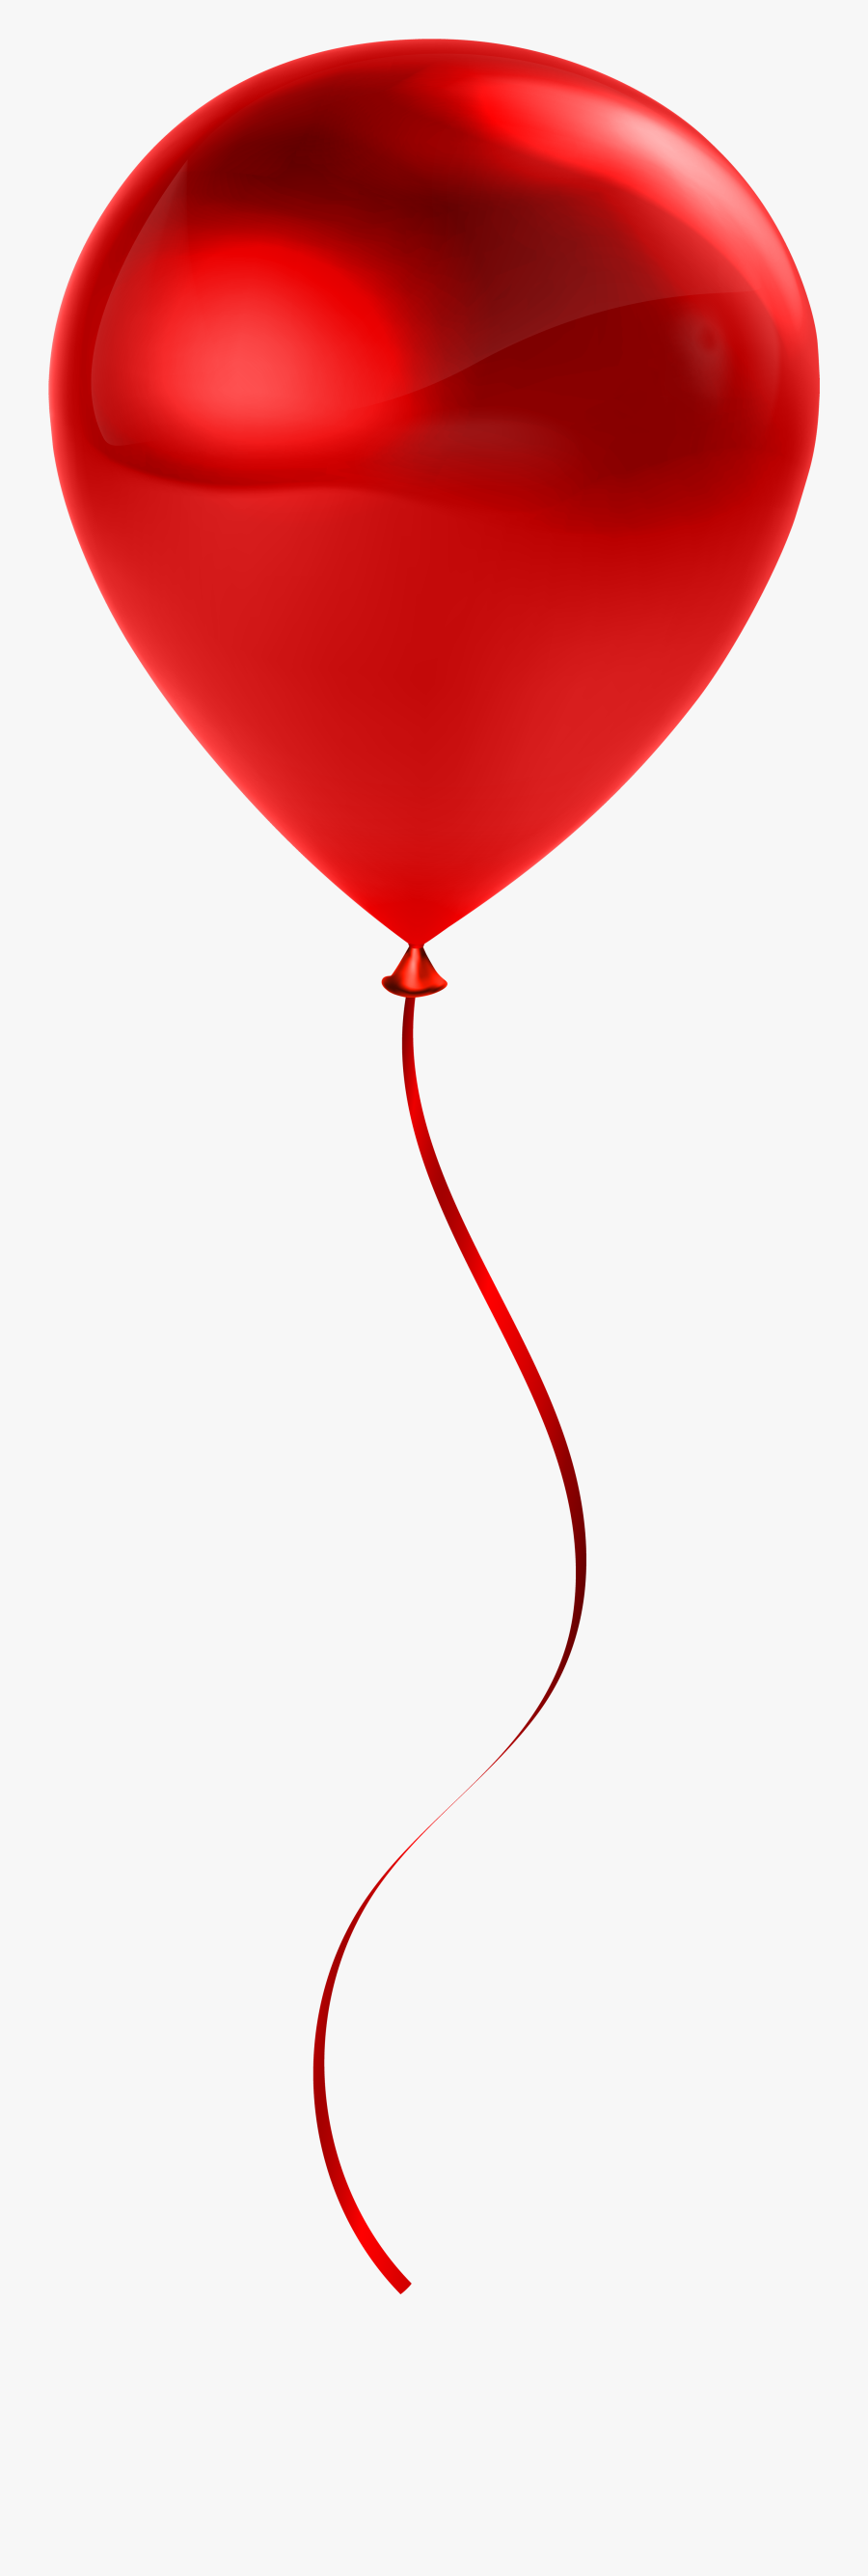 Transparent Two Heart Png - Red Balloon Transparent Background, Transparent Clipart